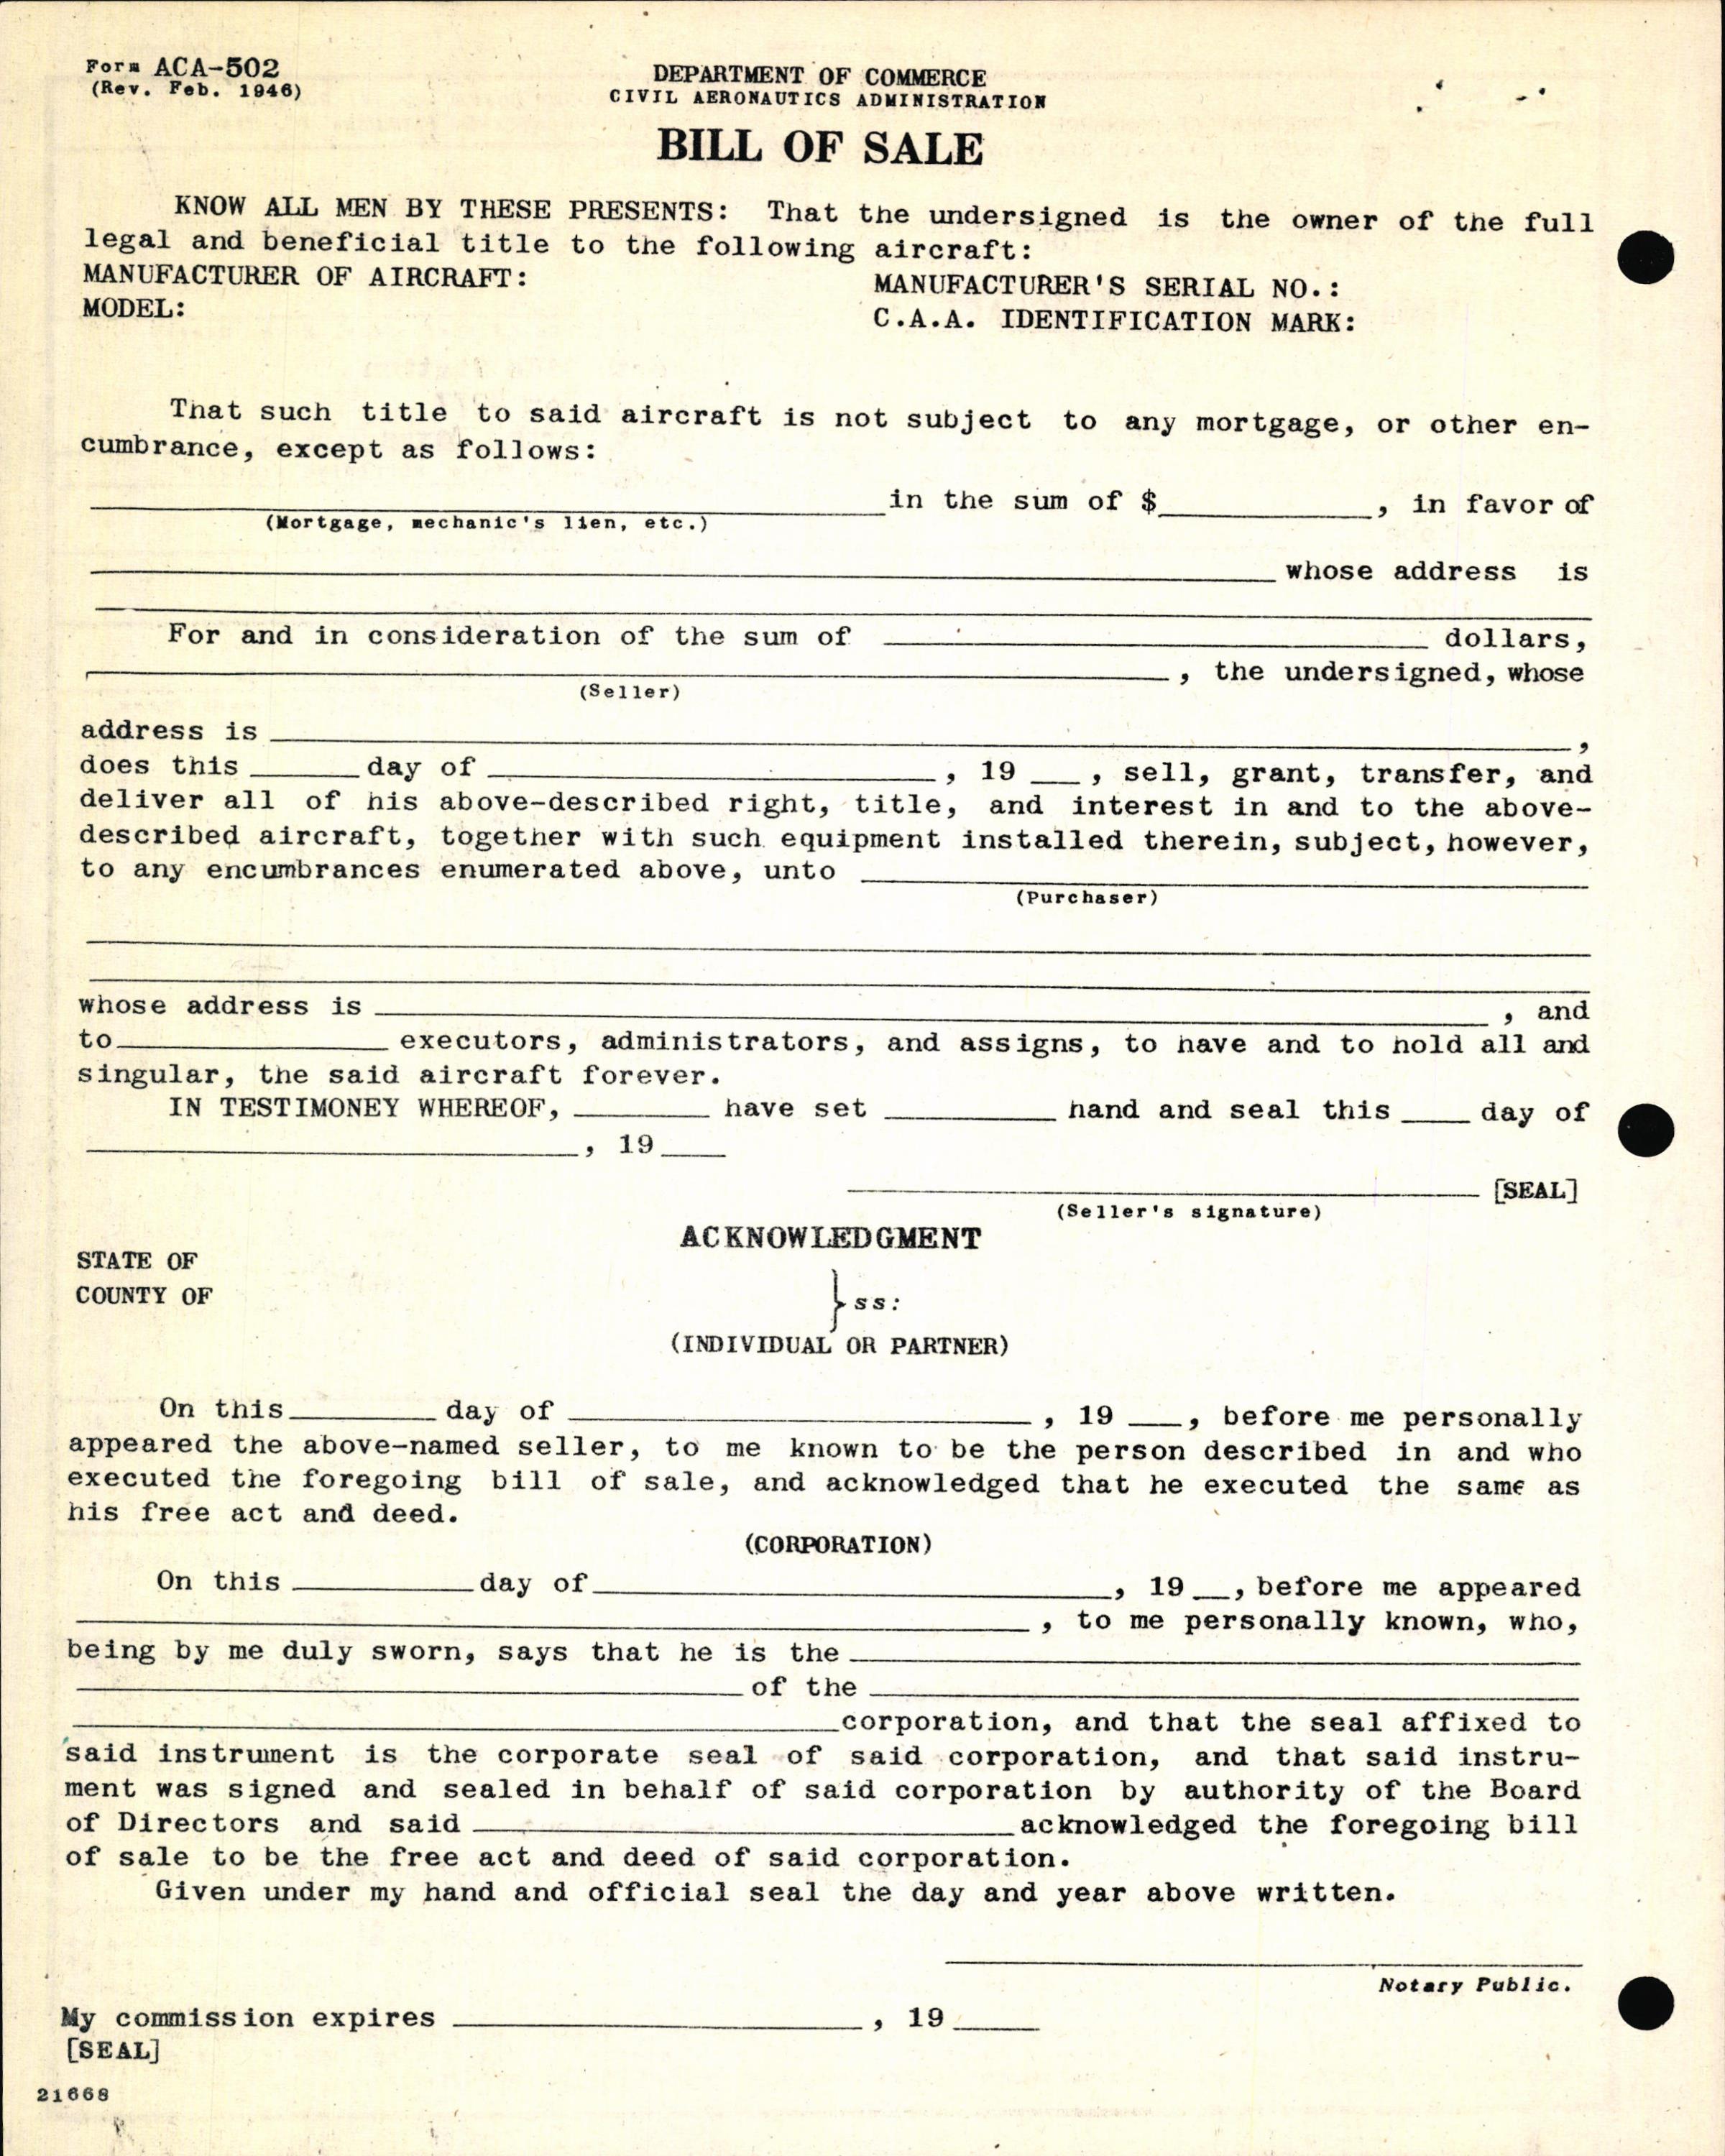 Sample page 4 from AirCorps Library document: Technical Information for Serial Number 1209